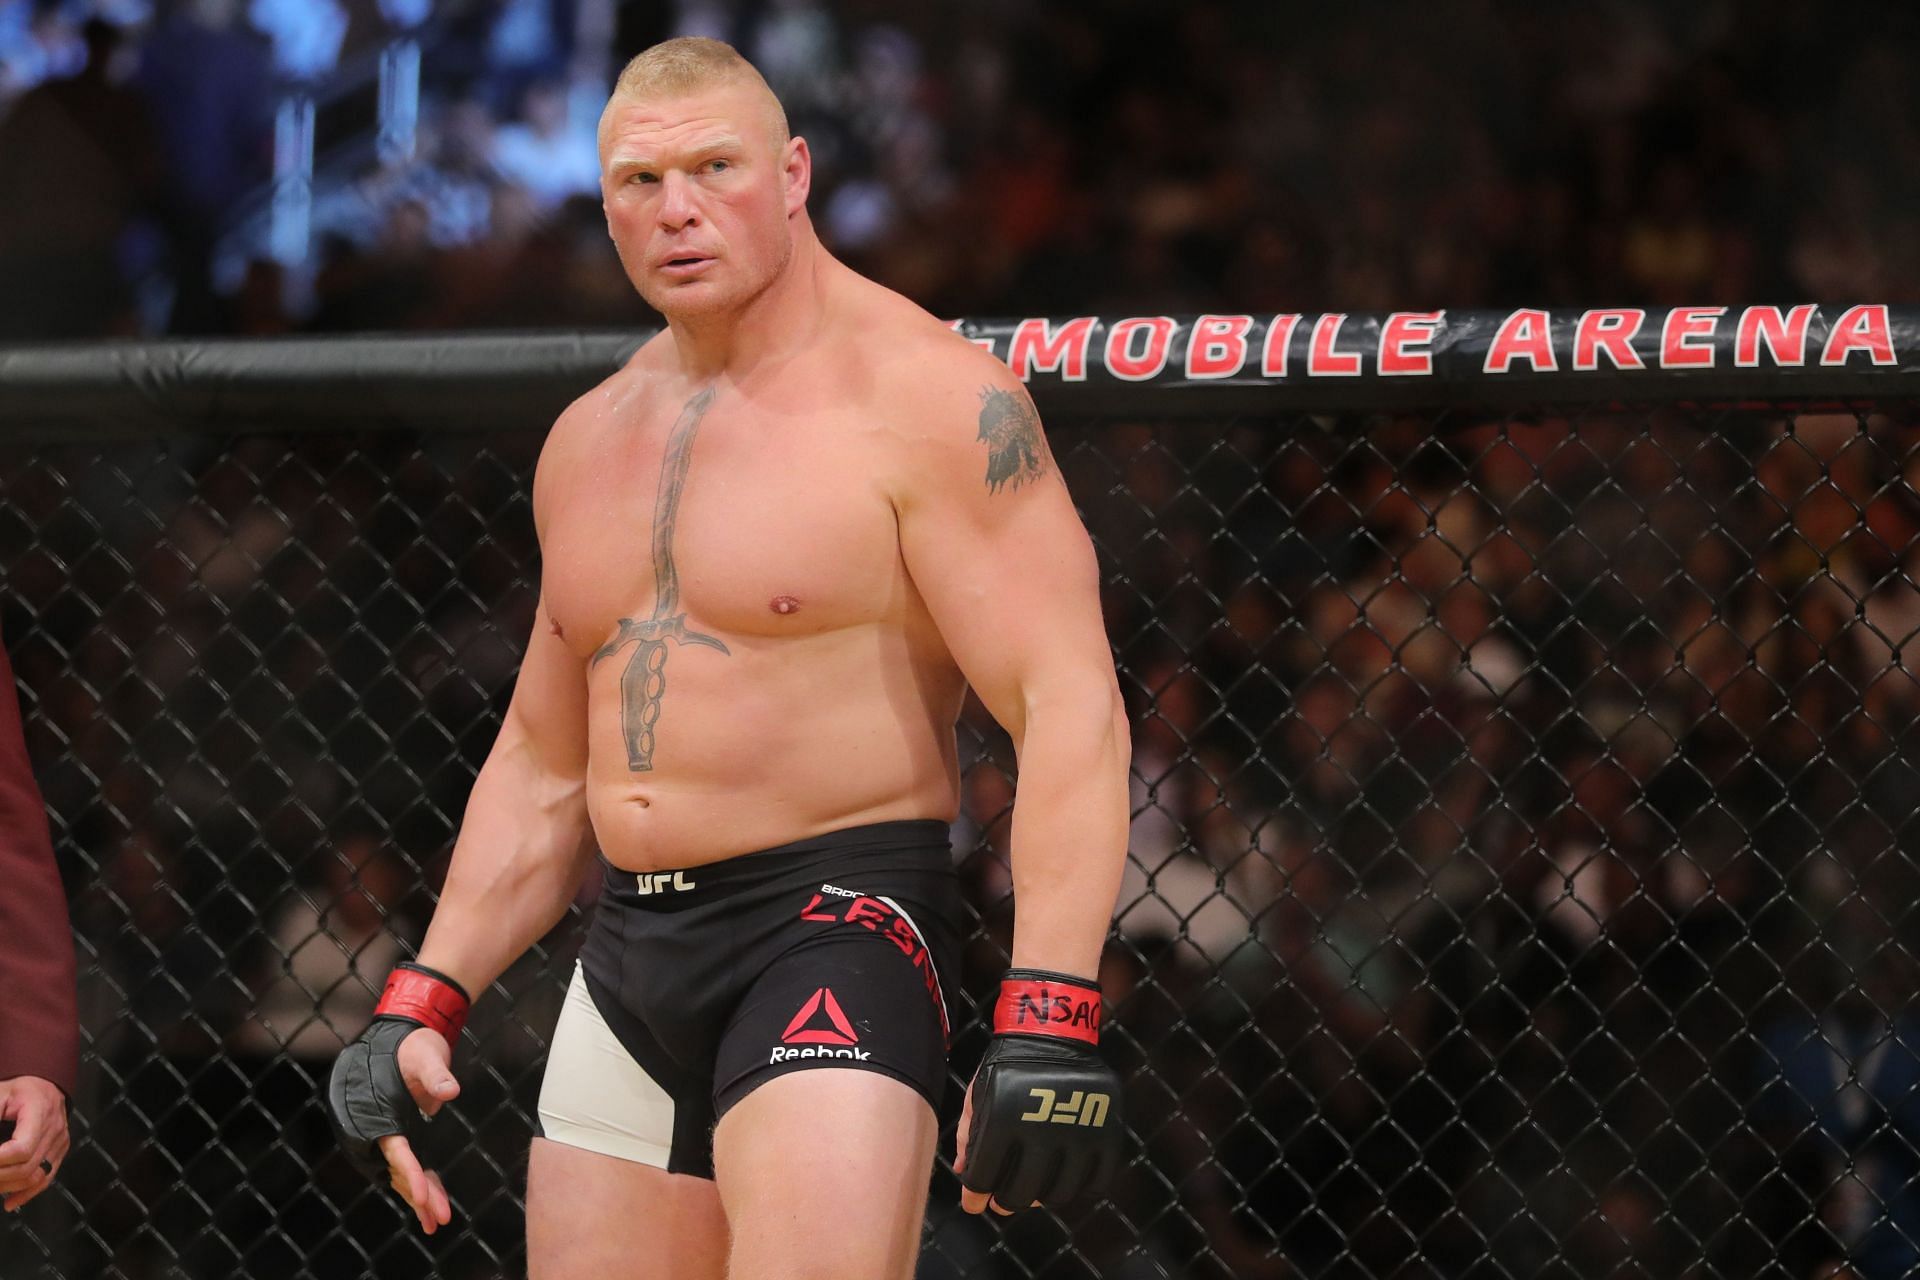 Brock Lesnar was happy to portray a bullying character in his time in the octagon